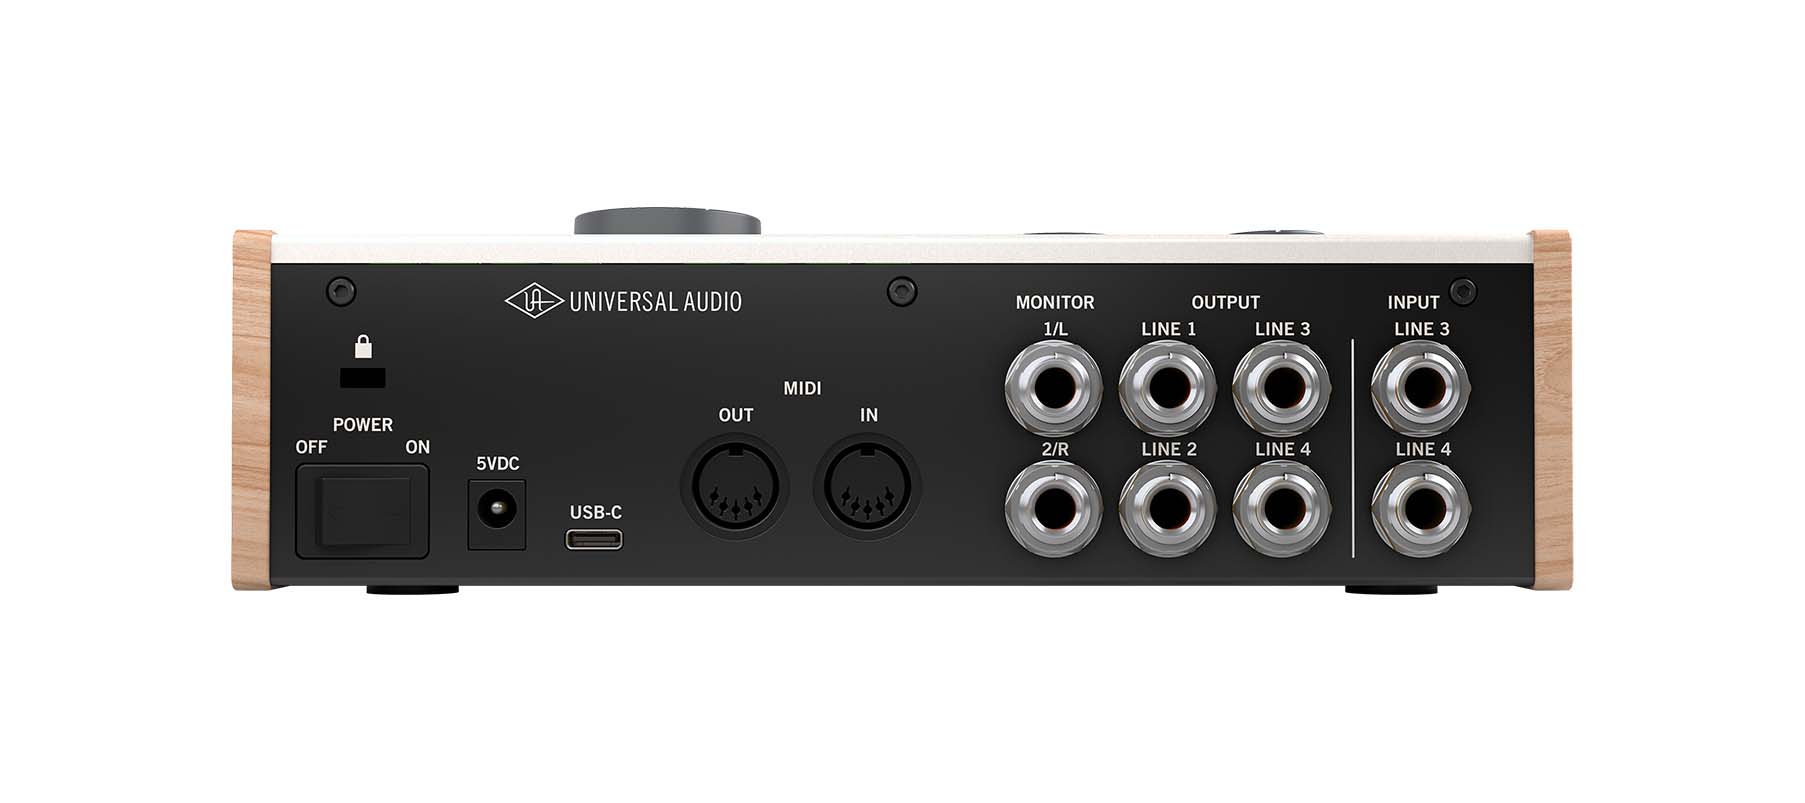 Universal Audio VOLT476 -  4-in/4-out USB 2.0 Audio Interface (FREE Plugins)